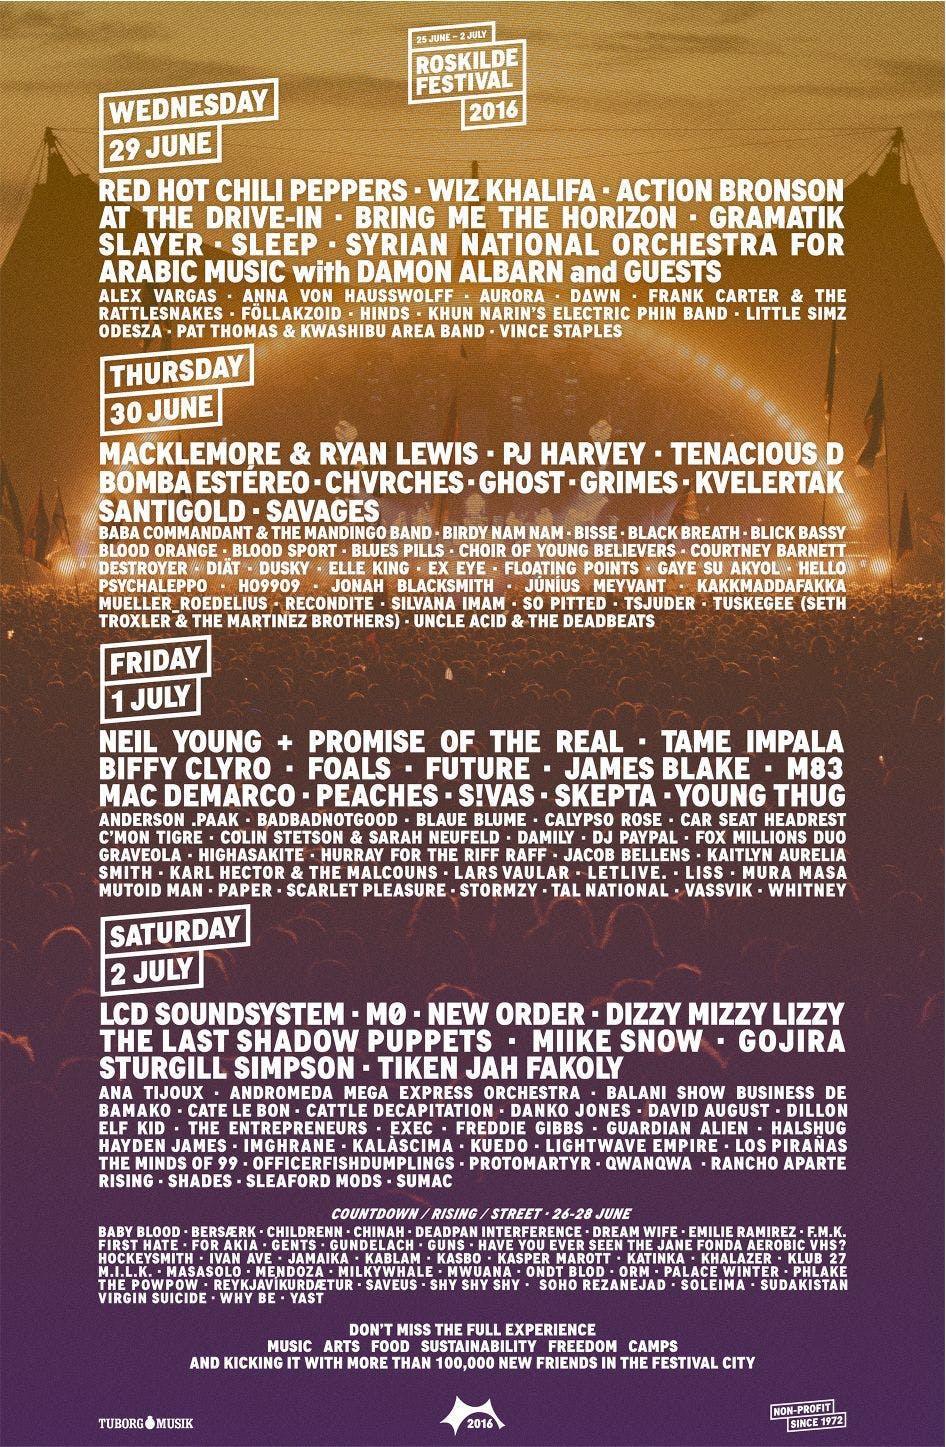 Biffy Clyro, Slayer and more announced for Roskilde festival